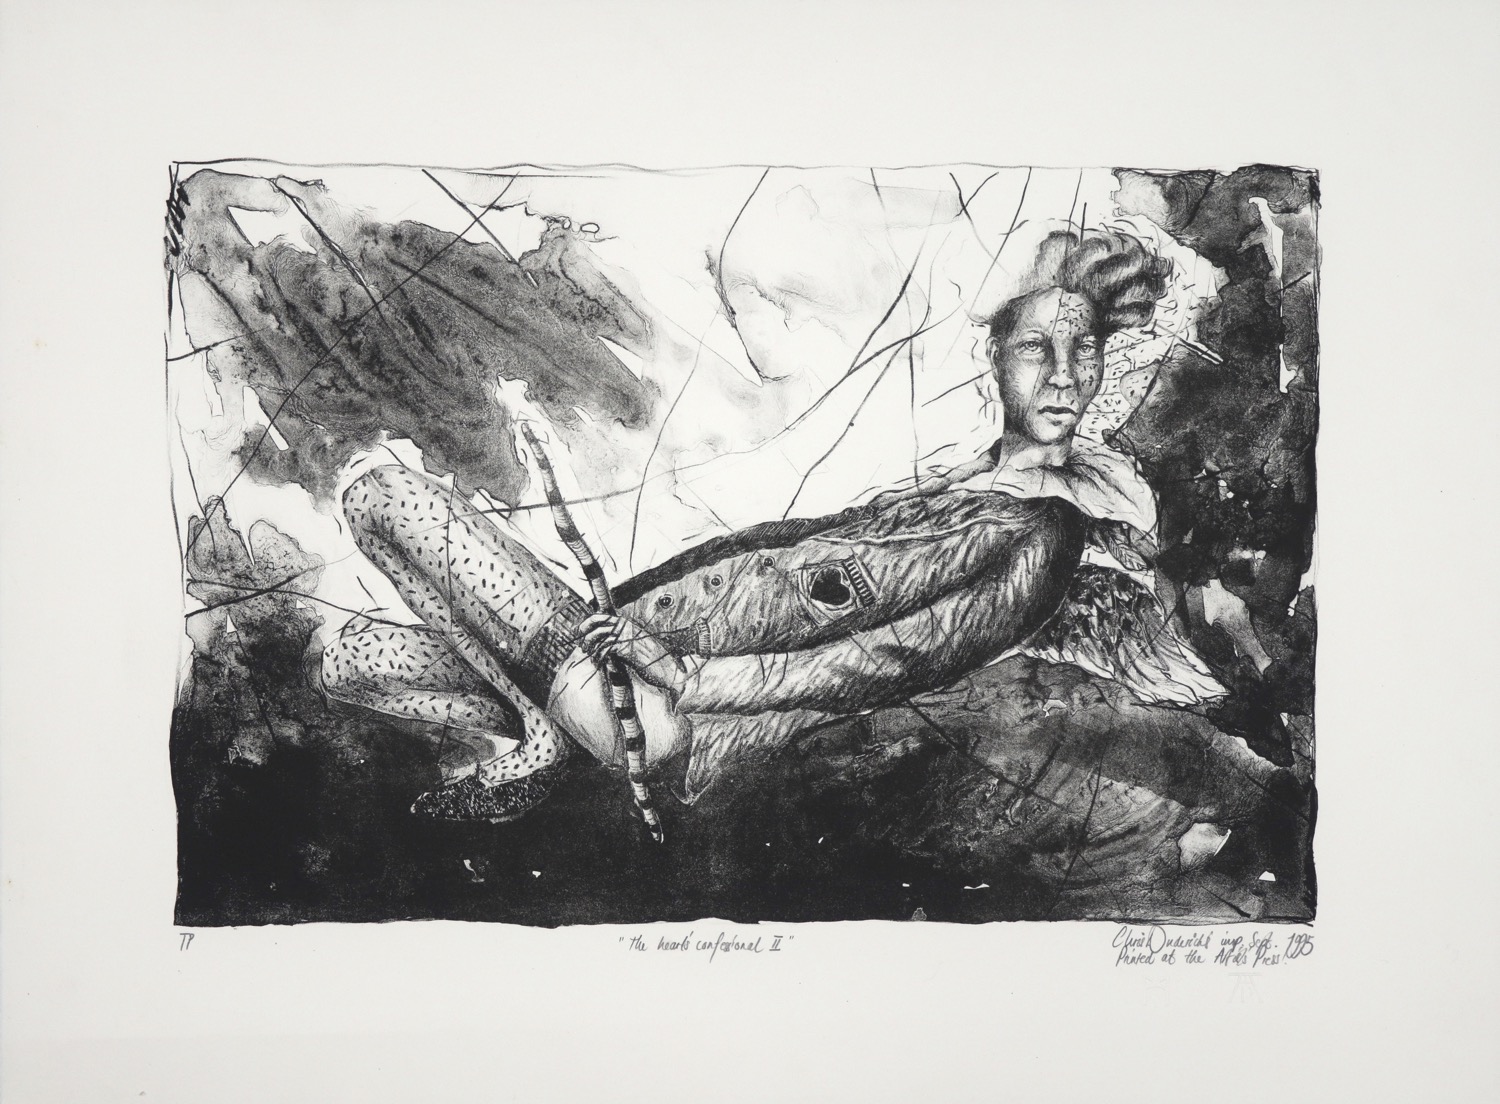 Black and white print of a reclining figure with head turned towards viewer holding a stripped stick.